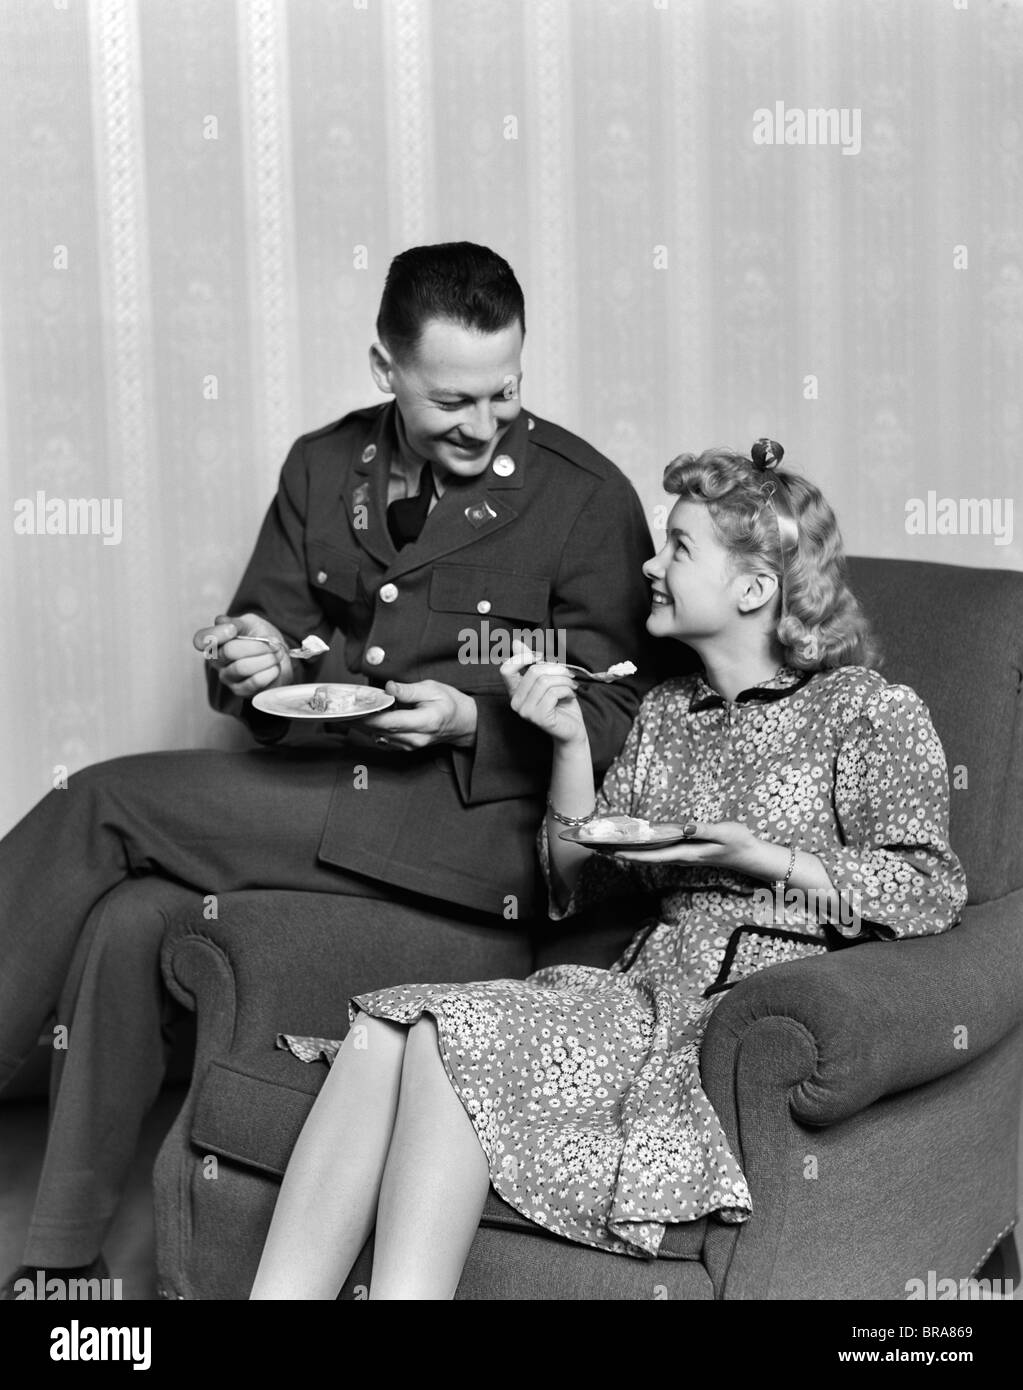 1940s SMILING COUPLE EATING DESSERT MAN IN ARMY UNIFORM Stock Photo